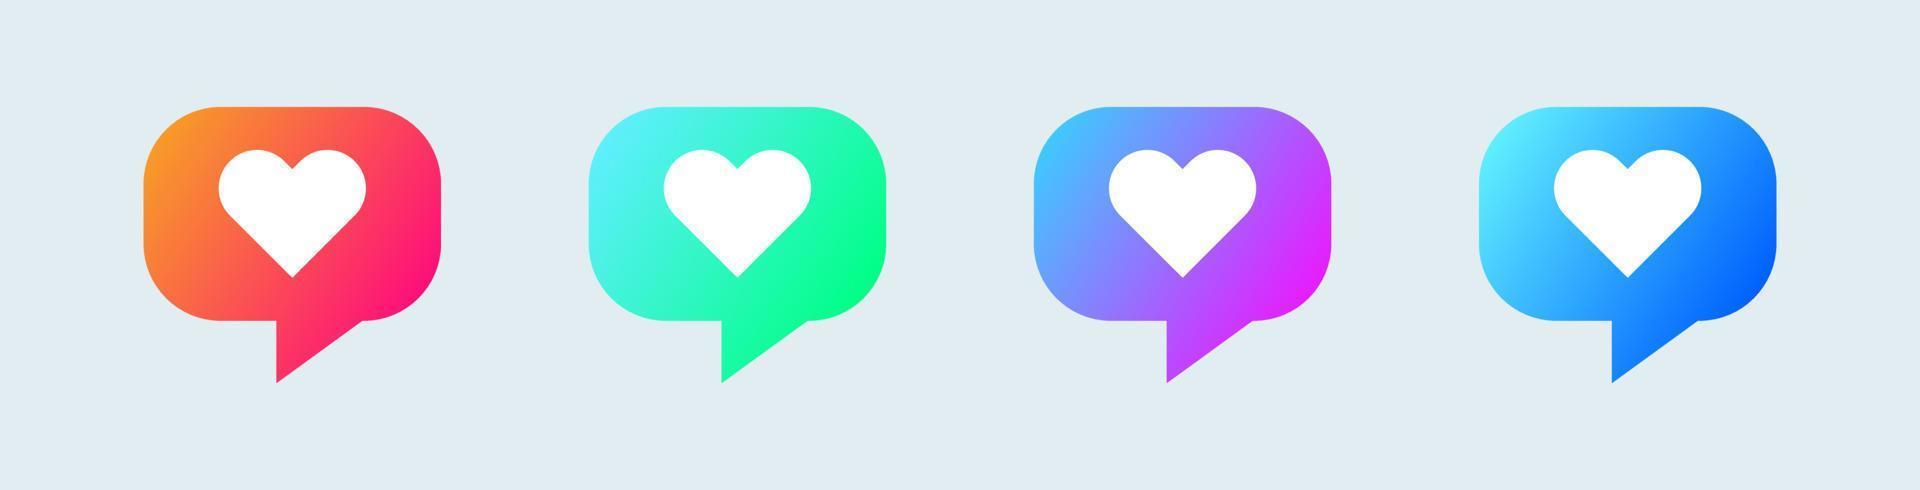 Gradient message bubble with heart icon. Like social media icon vector illustration.